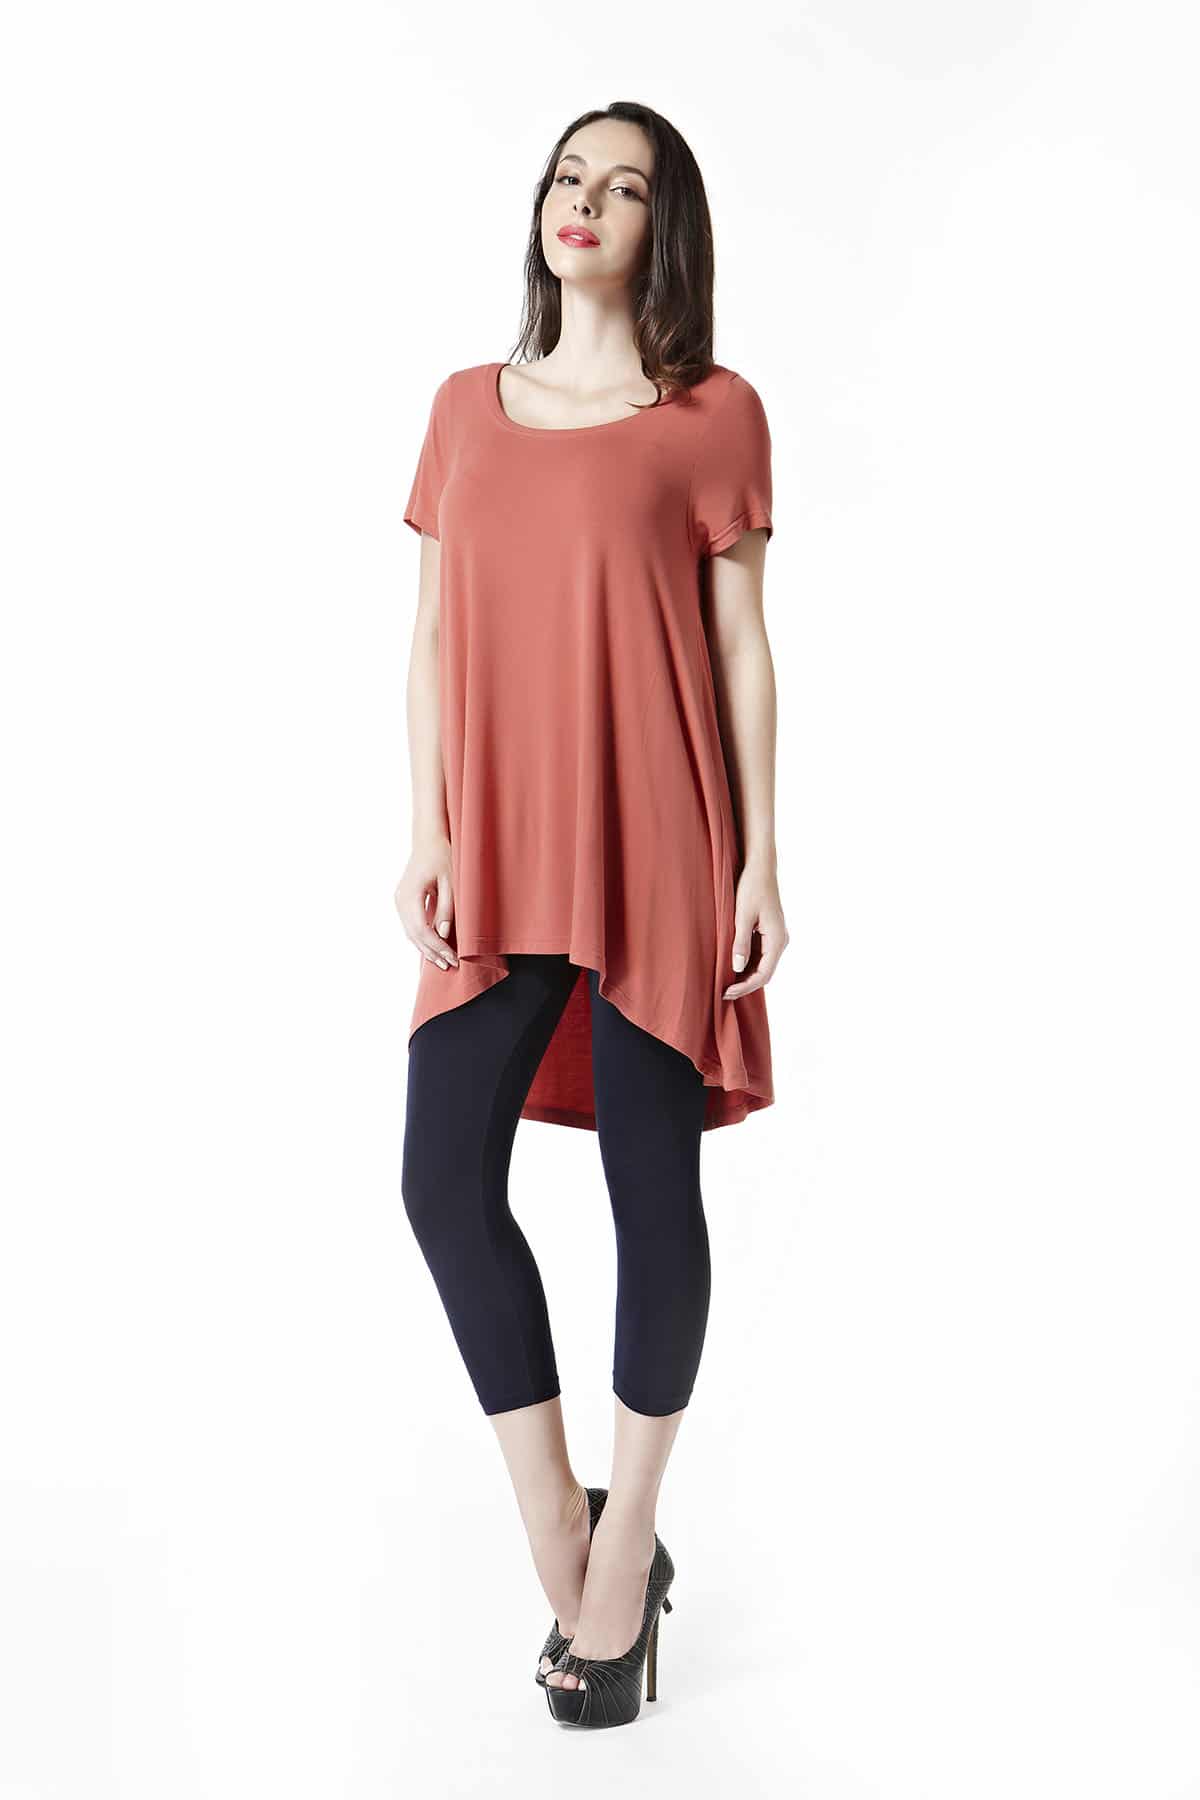 Bamboo Natural Fabric Scoop Neck High Low Top